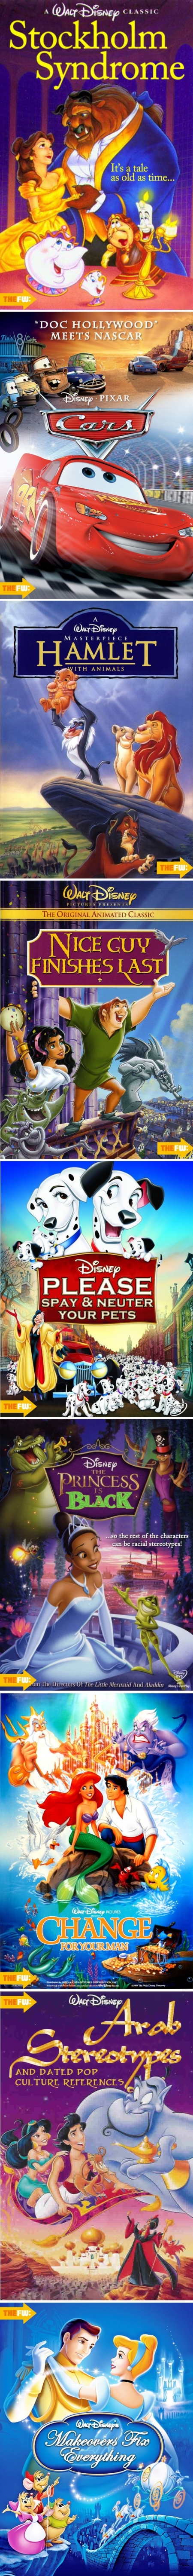 http://pics.blameitonthevoices.com/062013/small_disney%20movies%20with%20honest%20titles%20-%20small.jpg